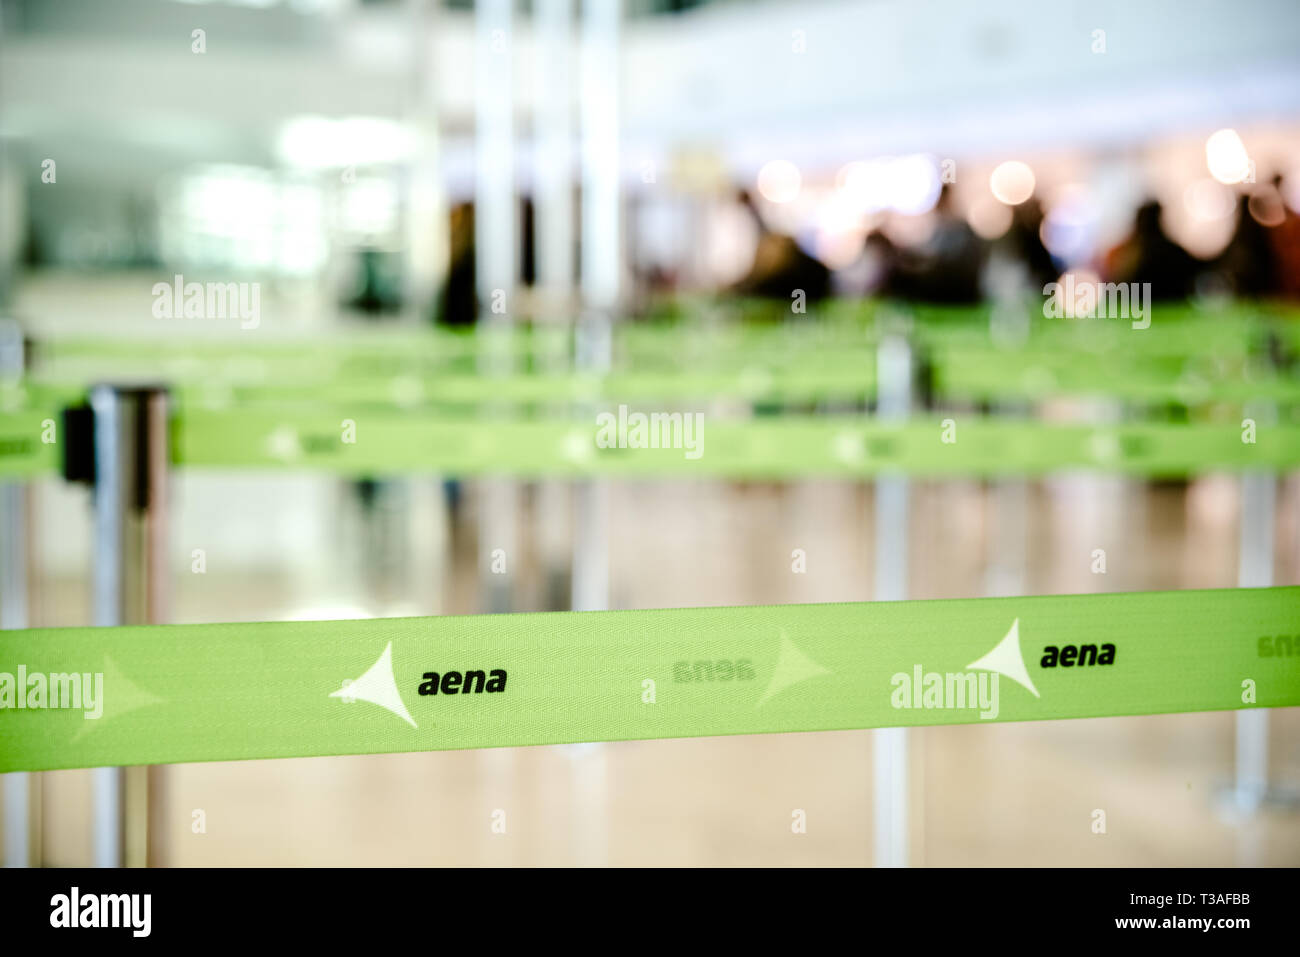 Valencia, Spain - March 8, 2019: Tapes to distribute passengers in the queues of the checkin desk in a Spanish airport managed by AENA. Stock Photo